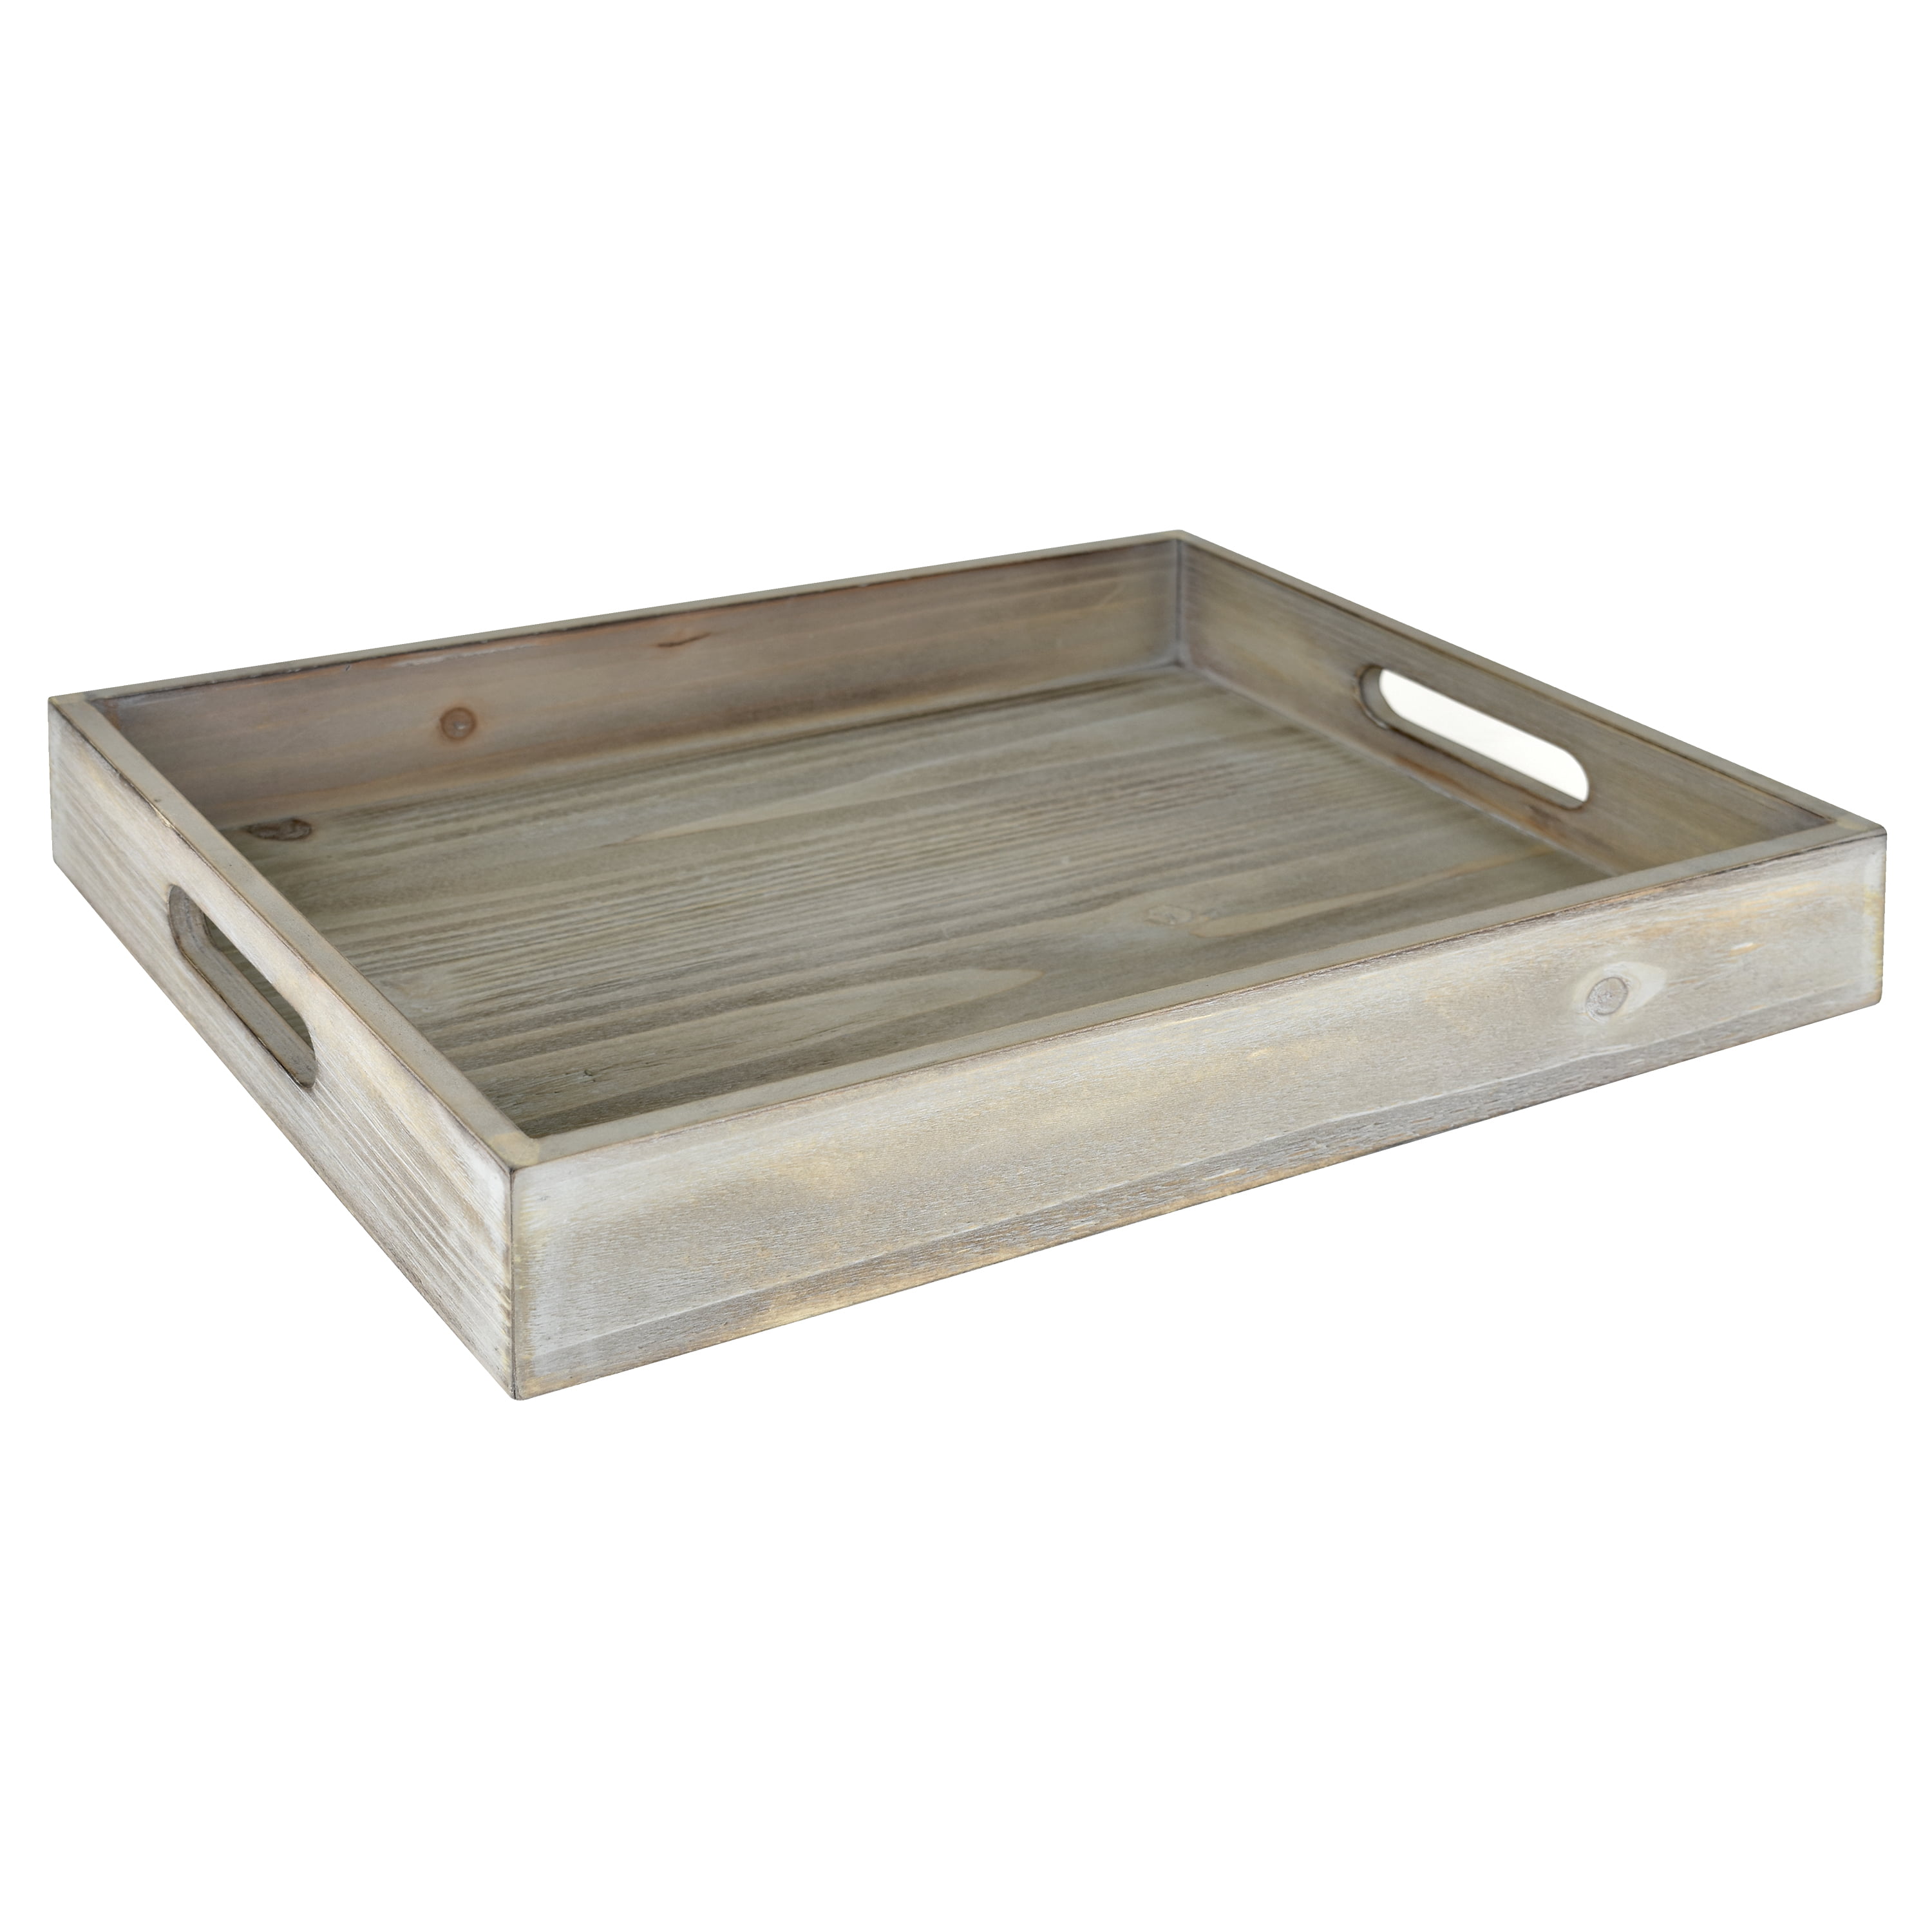 Mainstays Tabletop Rectangle Wooden Tray (Gray Wash, 16" x 12" x 2.5") $11.50 + Free S&H w/ Walmart+ or $35+